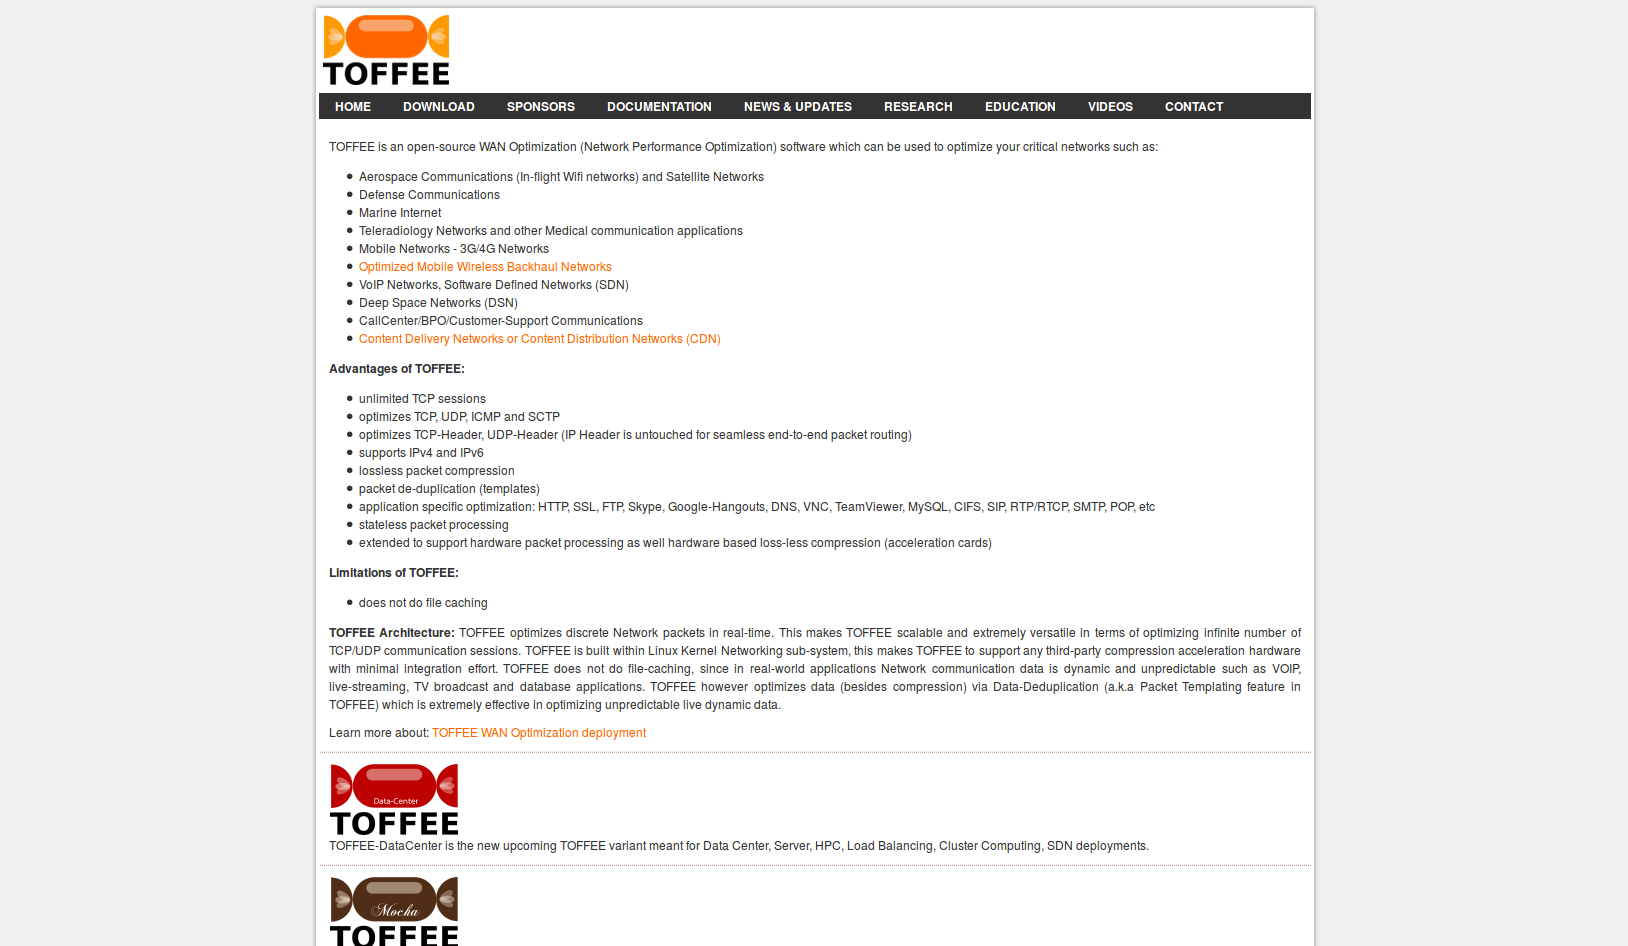 Screenshot of old The TOFFEE Project website built from scratch with PHP